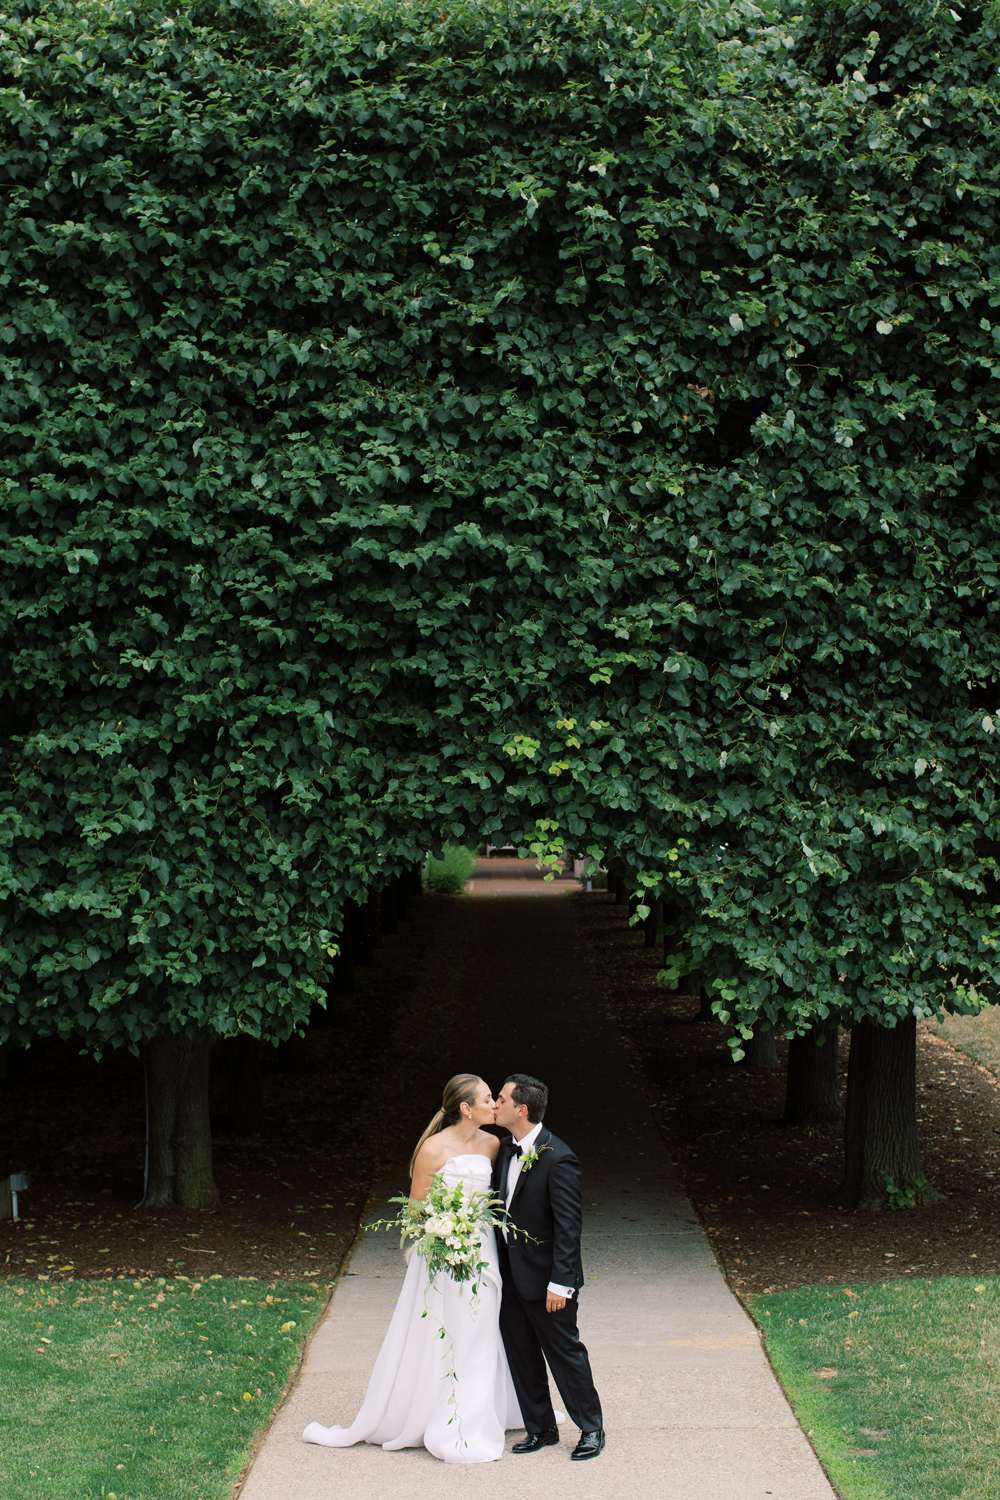 Memorial Art Gallery Linden Trees with Bride and Groom kissing | Mary Dougherty